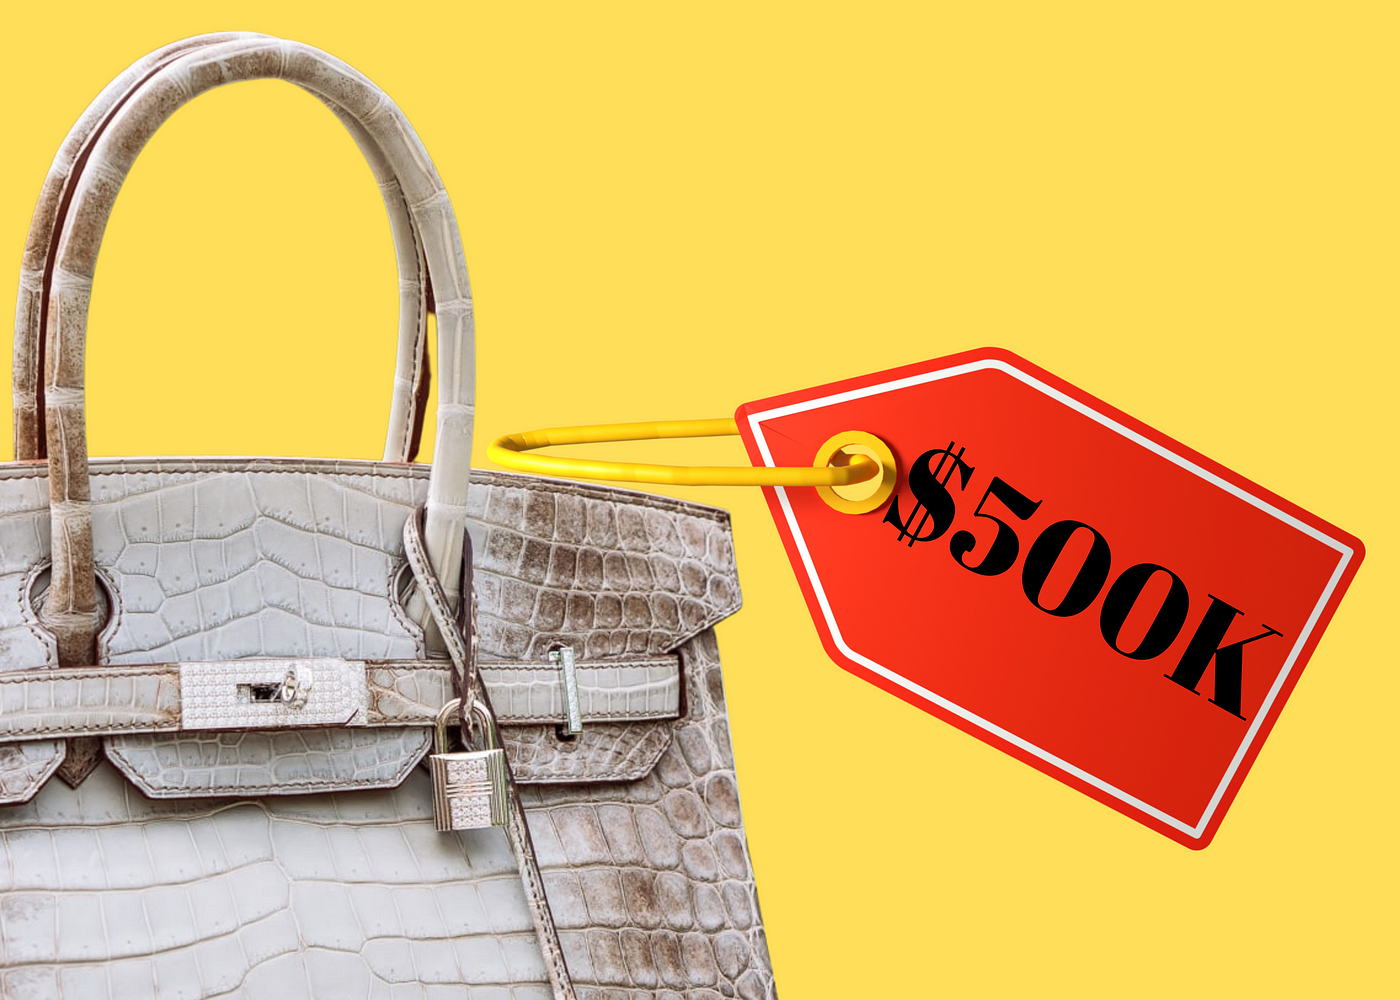 10 Top Most Expensive Birkin Bag: Let's Explore The Price And More